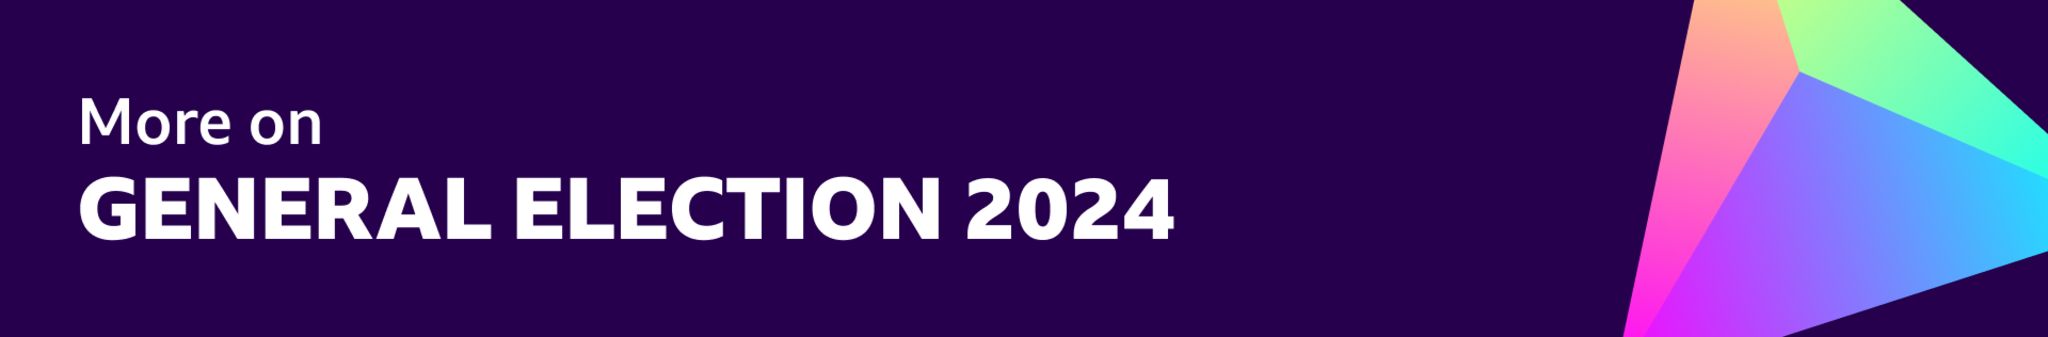 More on the General Election 2024